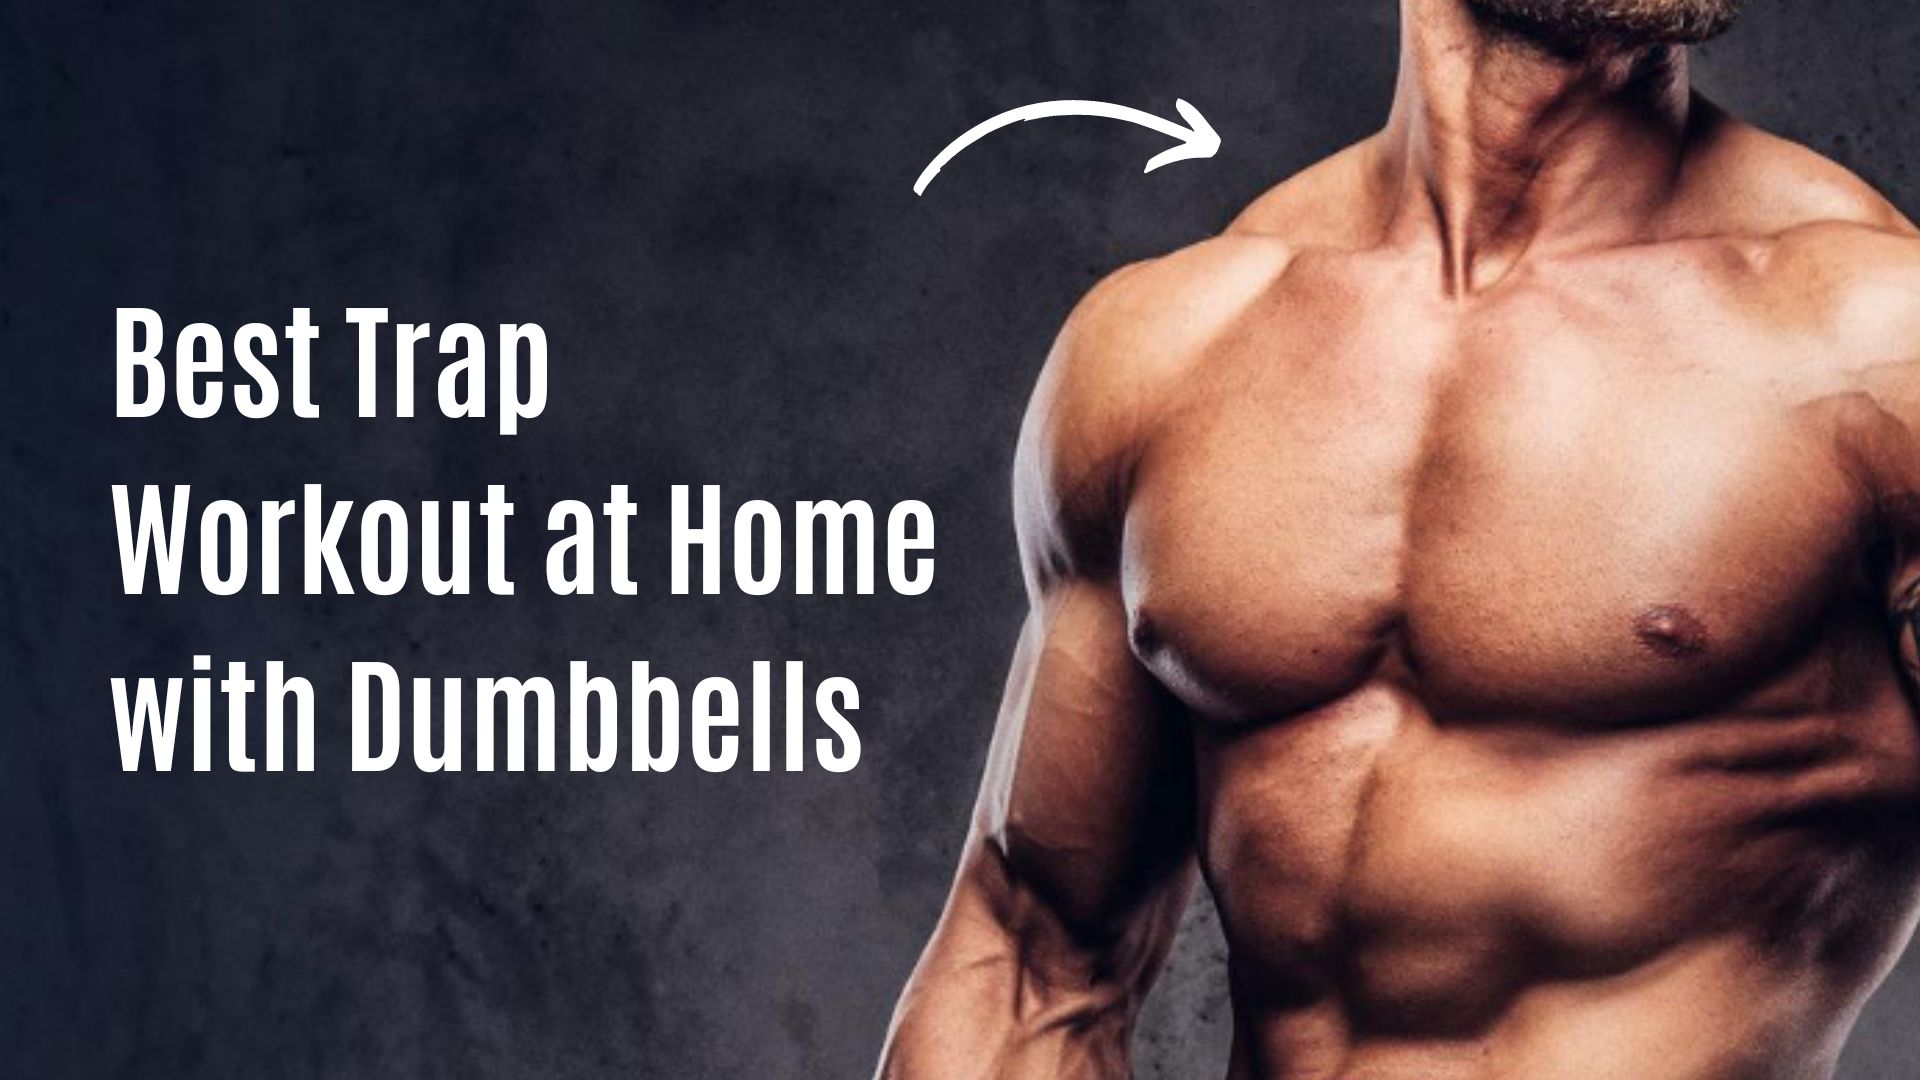 Best Trap Workout at Home with Dumbbells